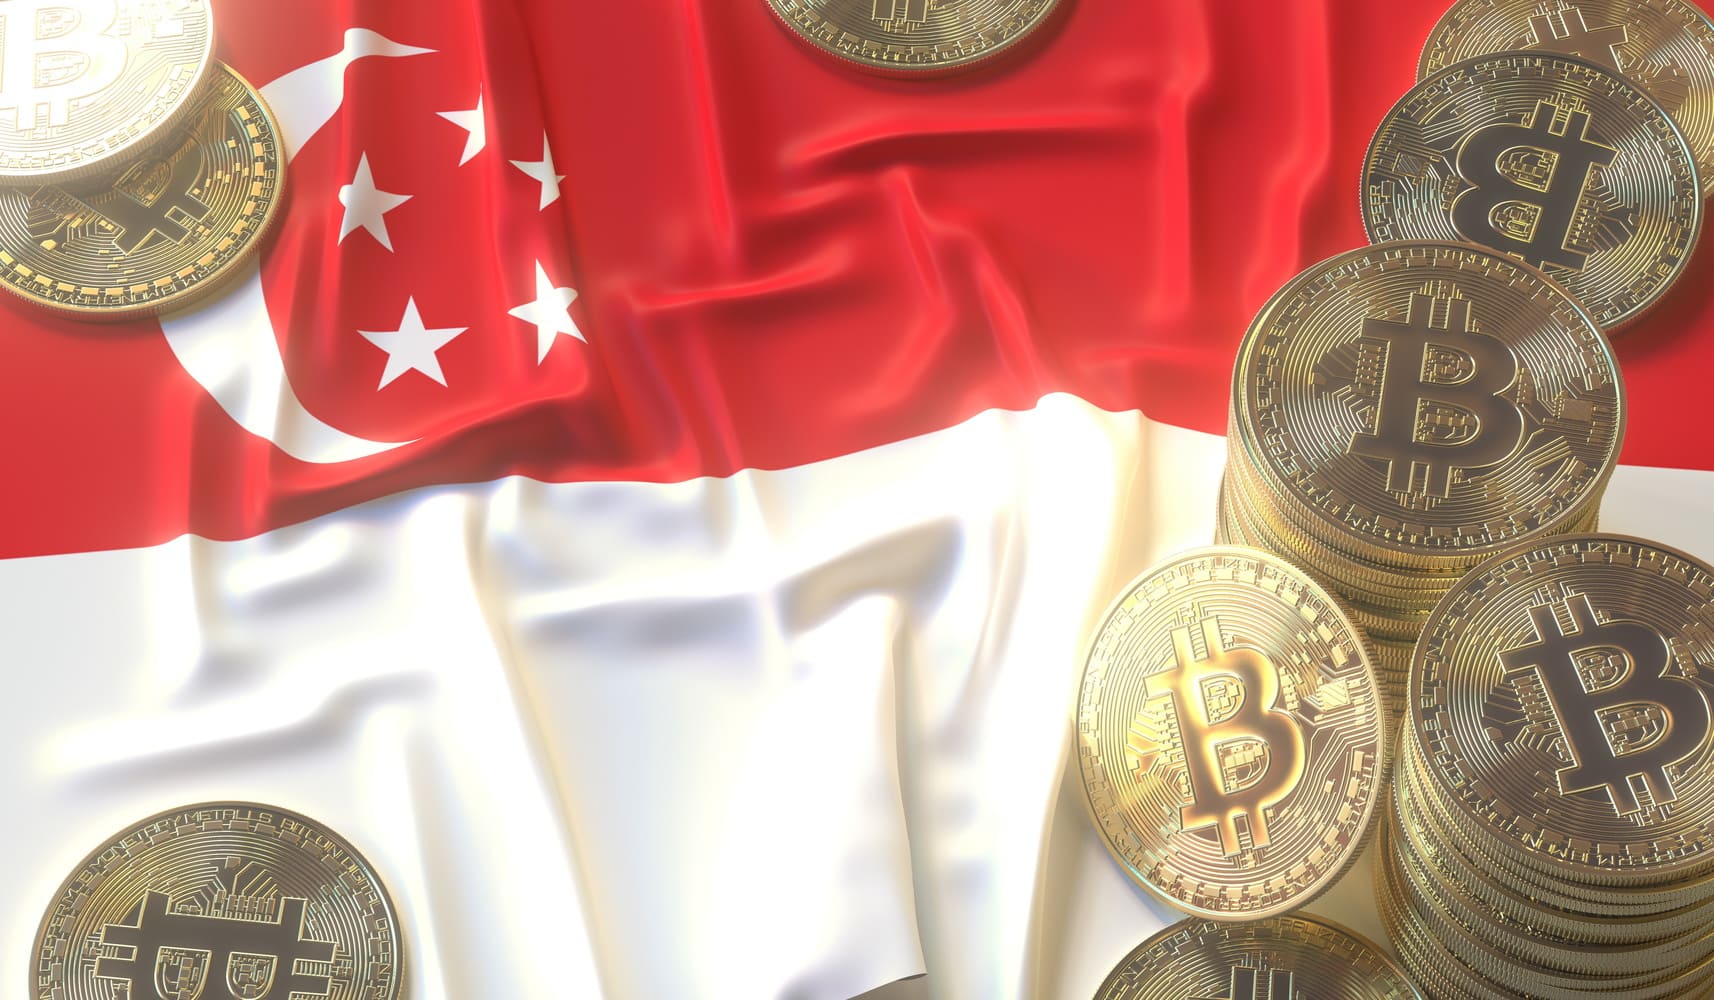 Singapore Authorities Consider Imposing New Restrictions on Crypto